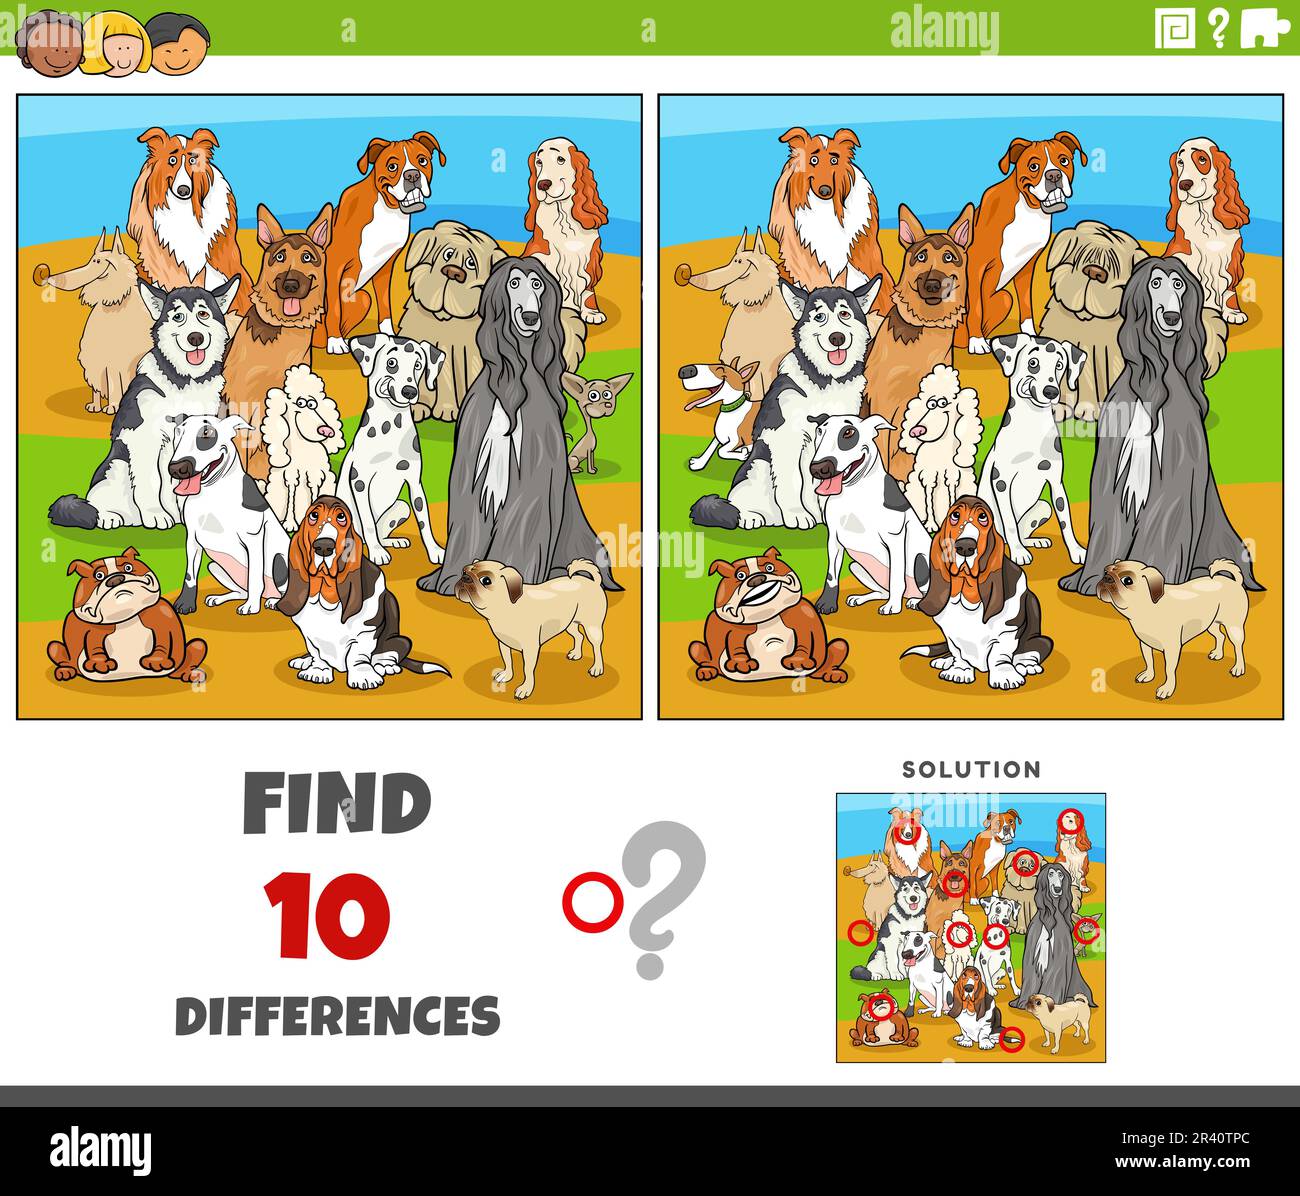 Cartoon illustration of finding the differences between pictures educational game with purebred dogs animal characters Stock Photo